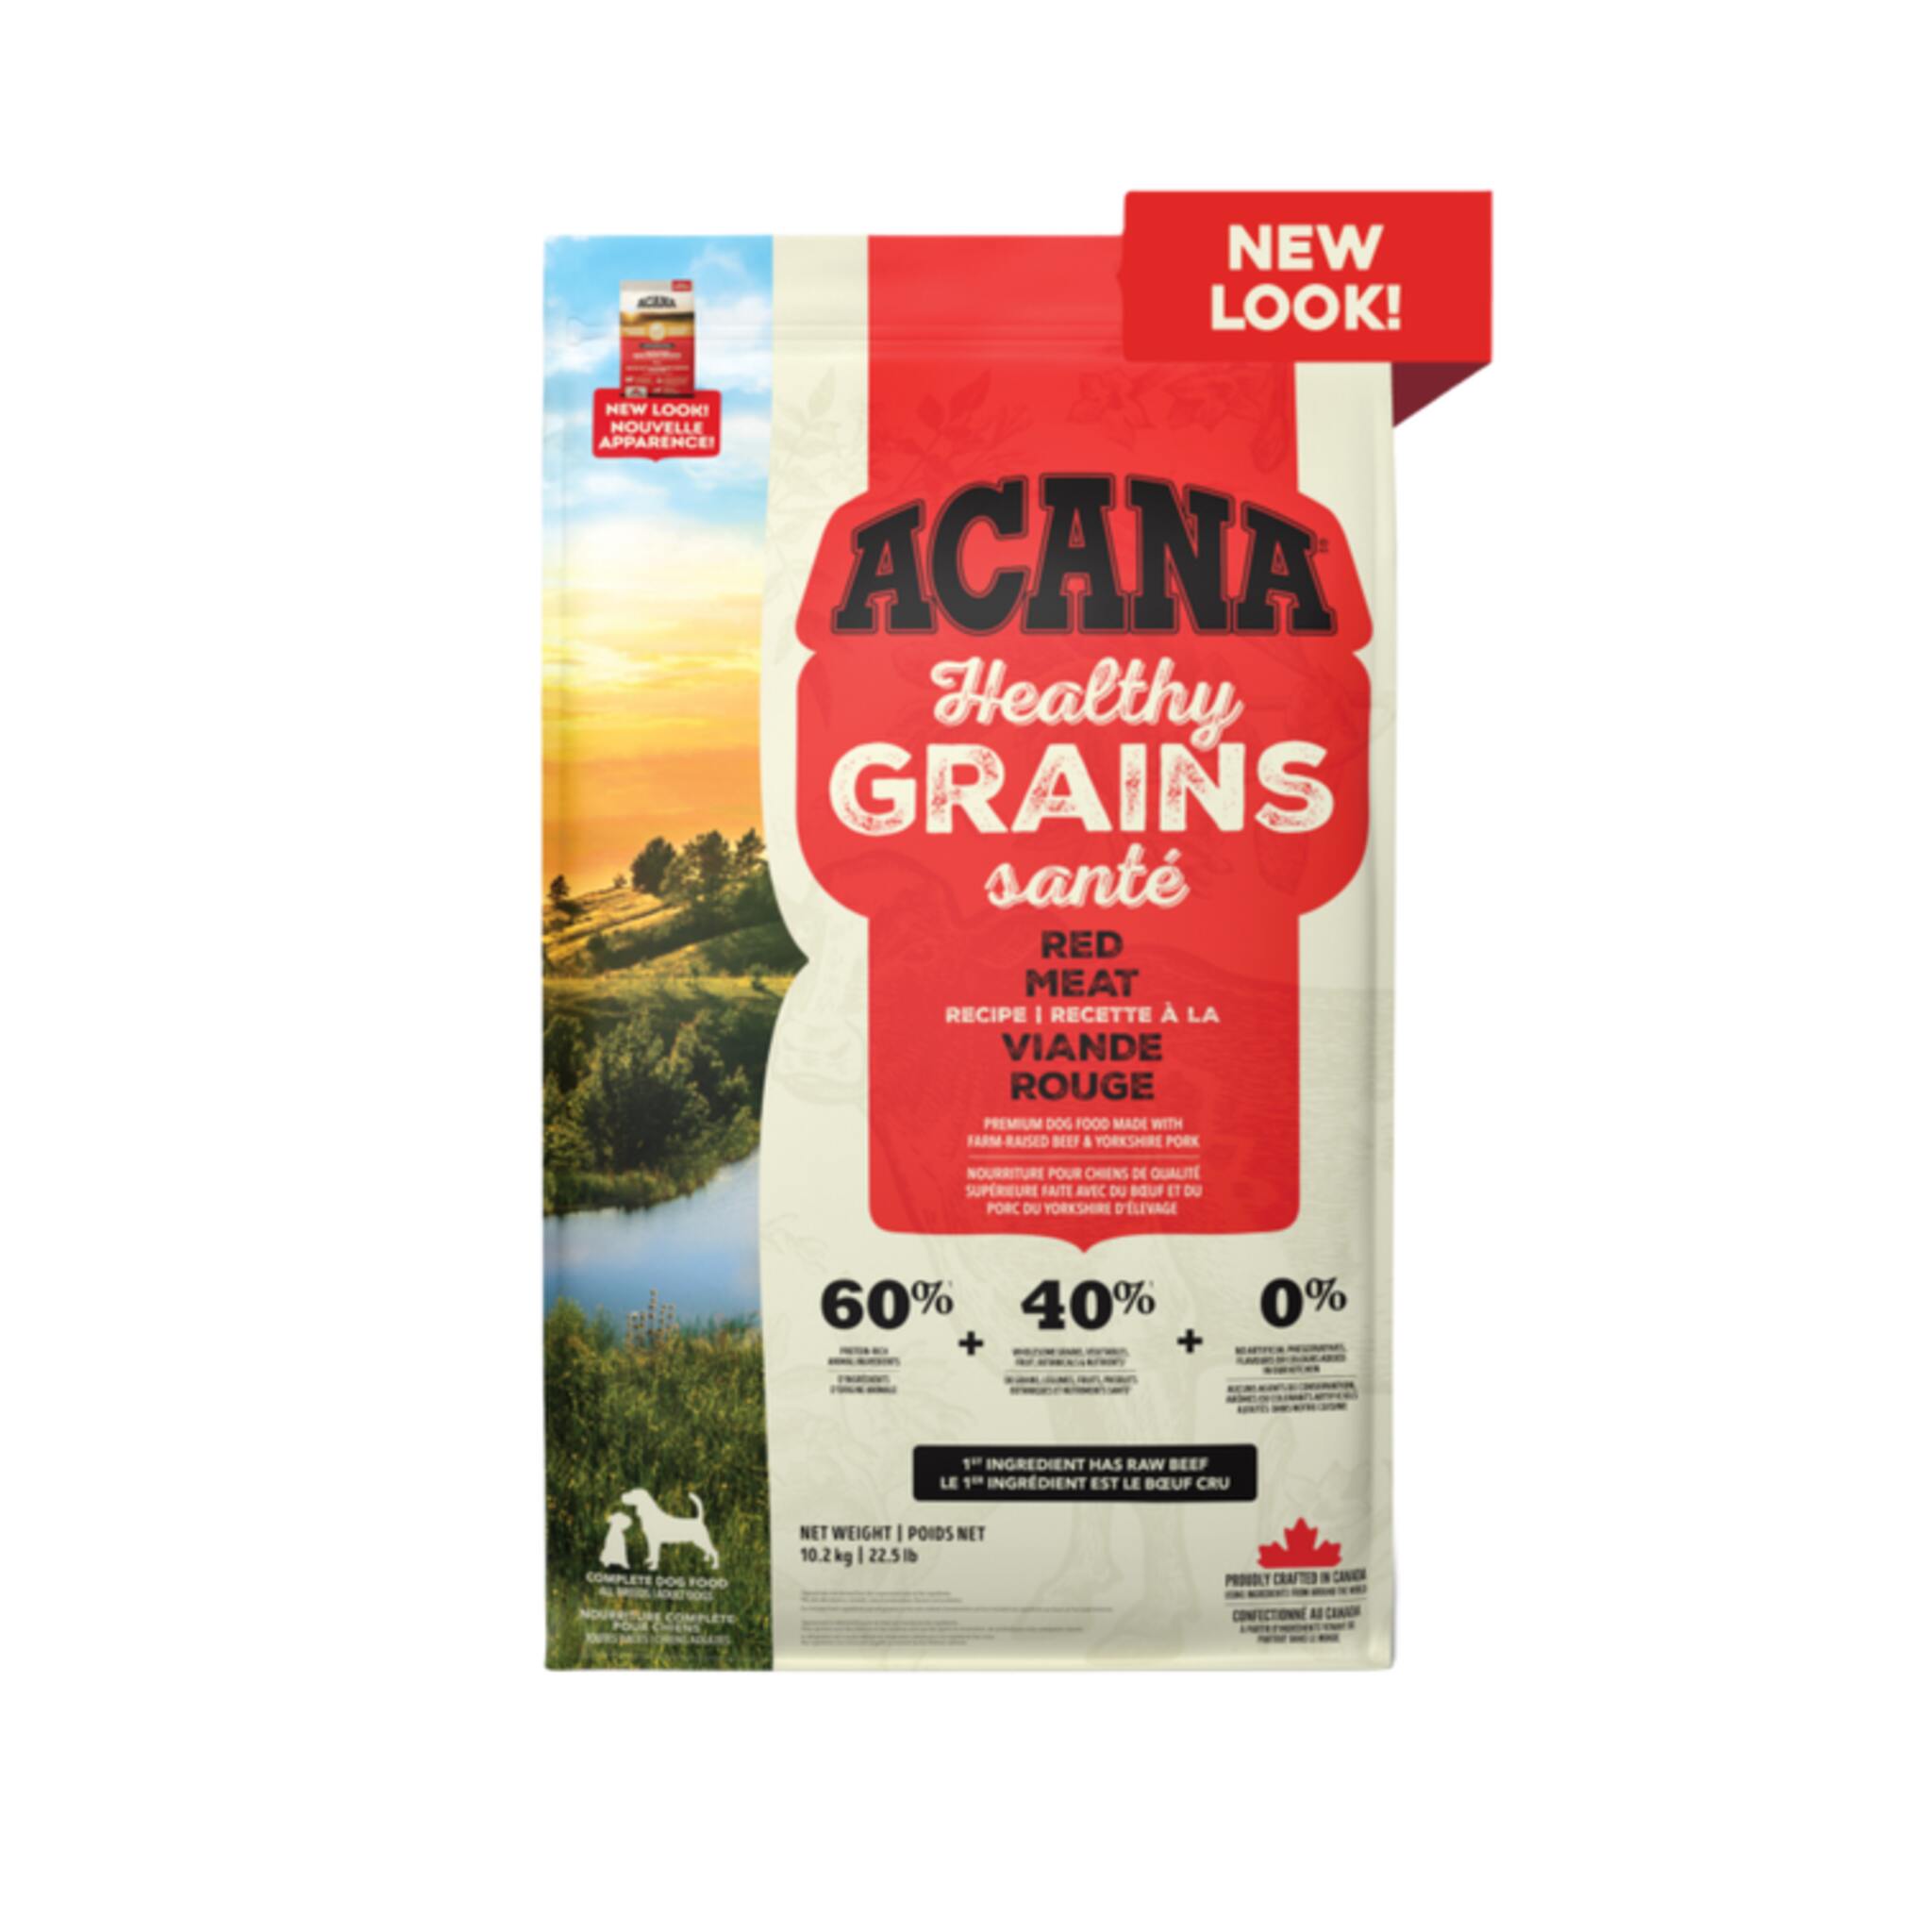 A bag of Acana Healthy Grains dog food, red meat recipe, 22.5 lb.